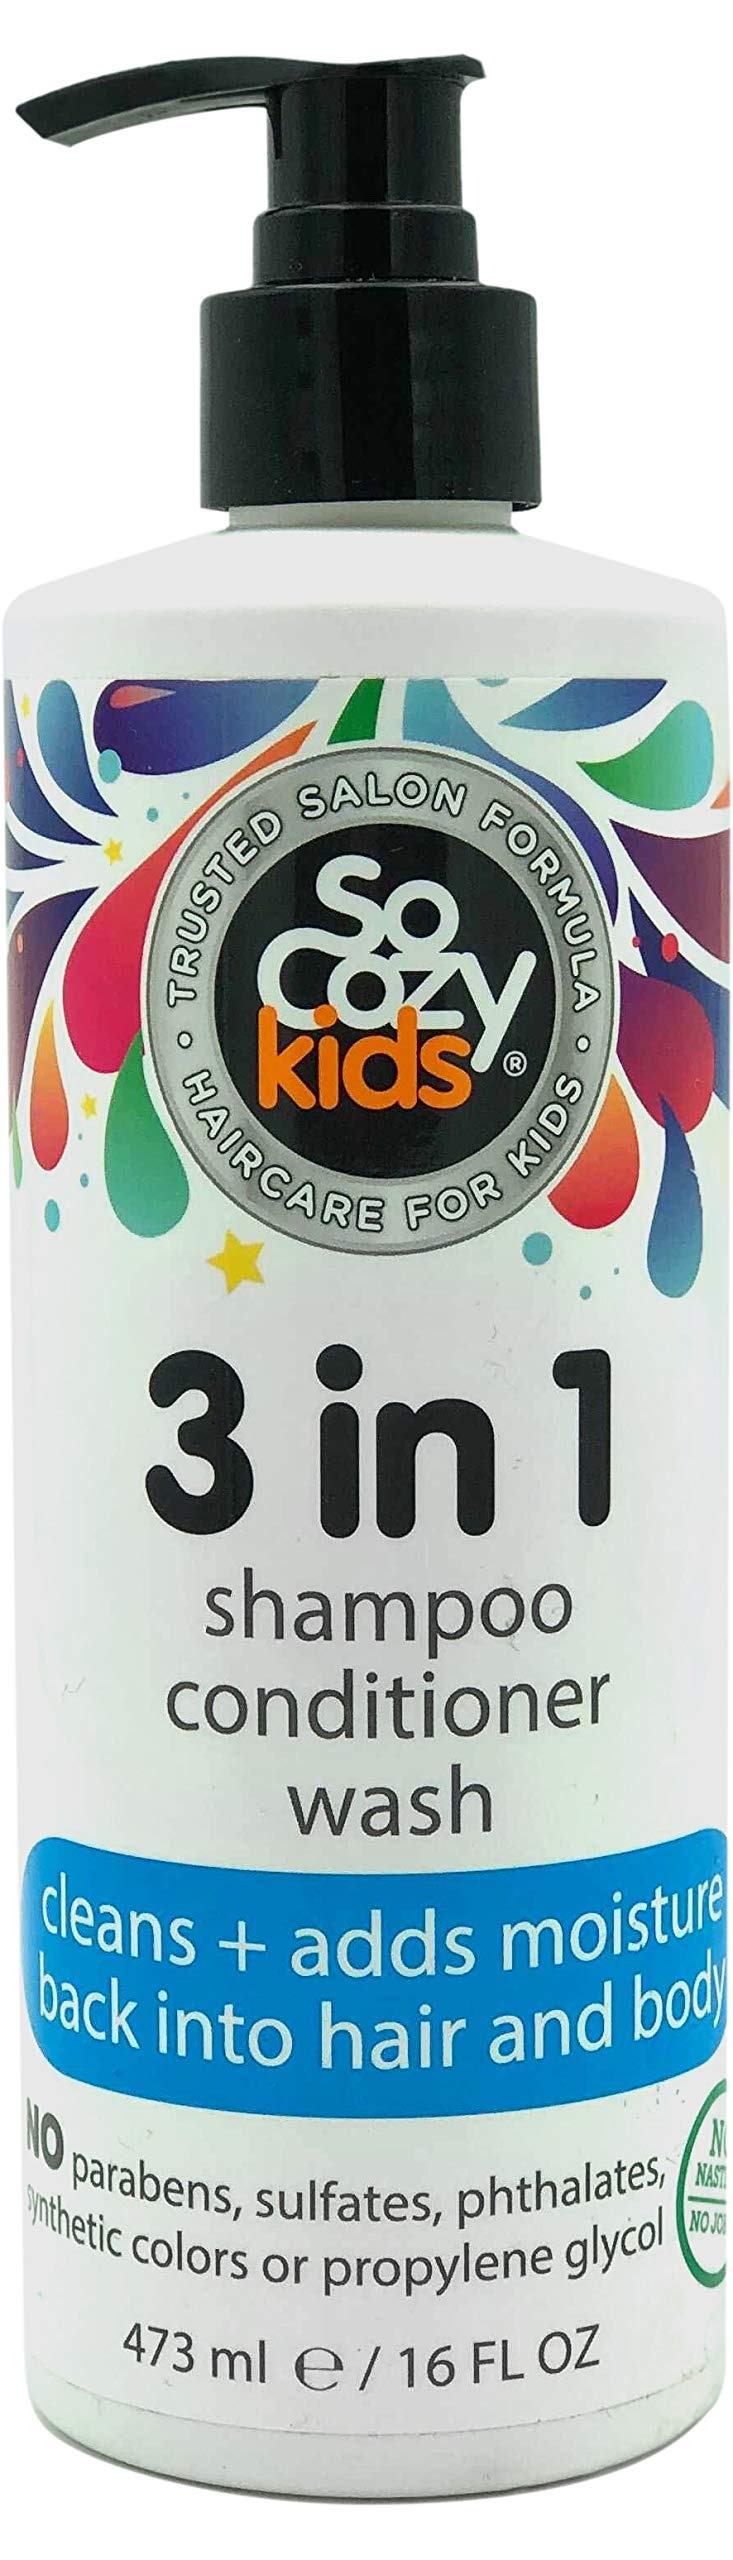 SoCozy 3in1 Shampoo + Conditioner + Body Wash For Kids Hair Cleans and Adds Moisture Back, Kiwi, 16 Fl Oz